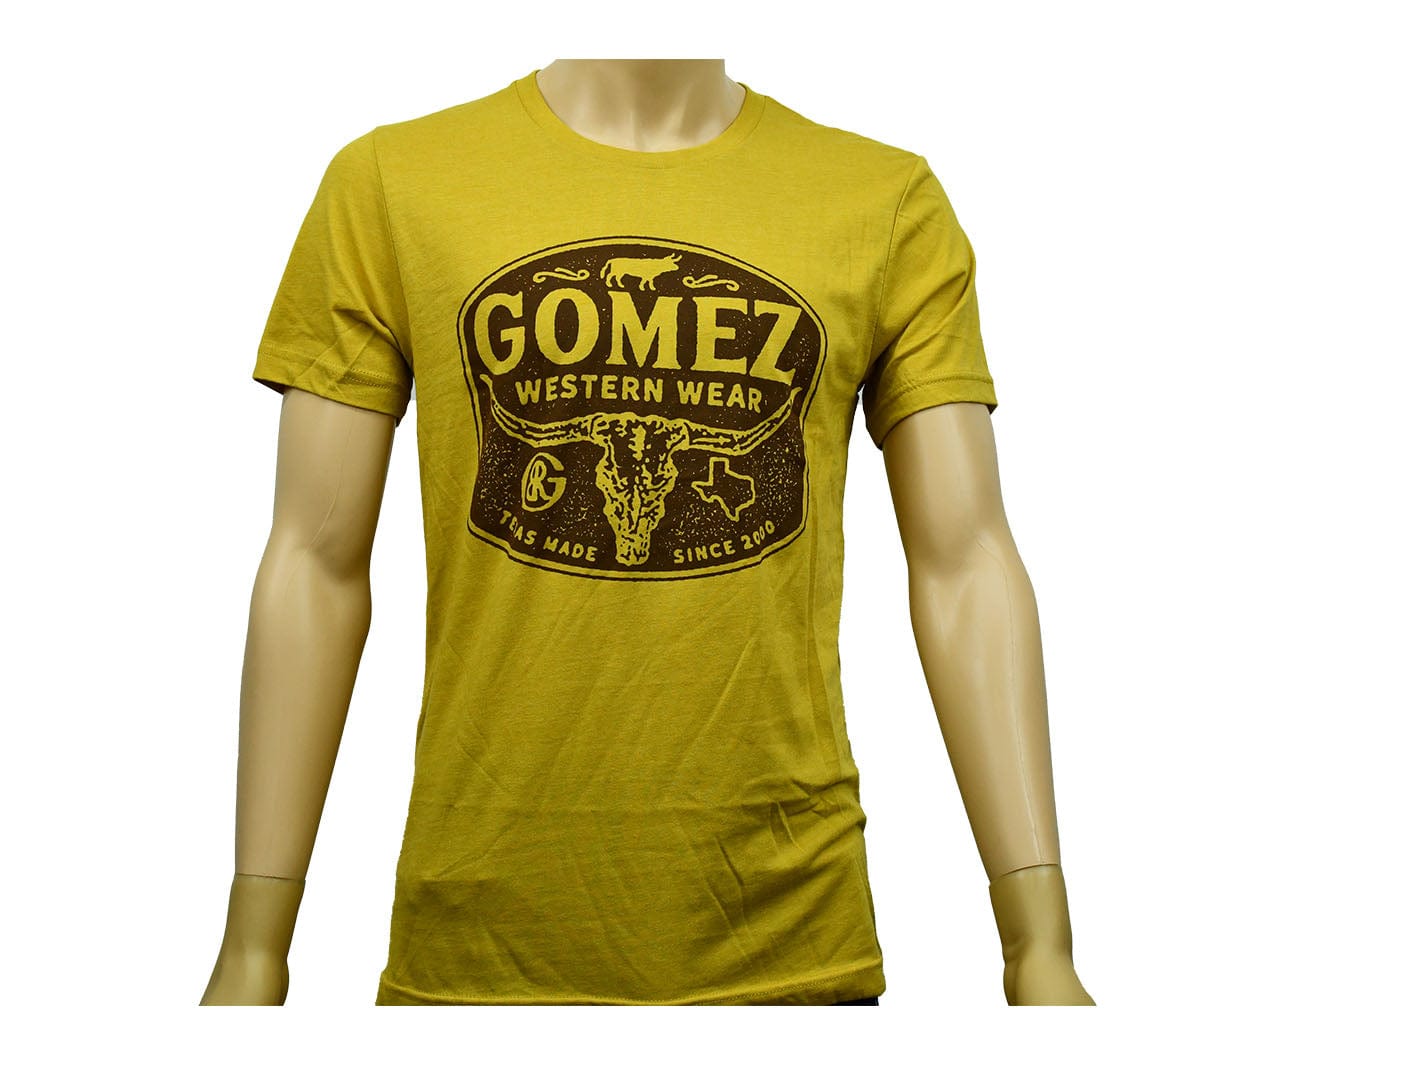 Gomez T-Shirt "Texas Made Since 2000" Yellow